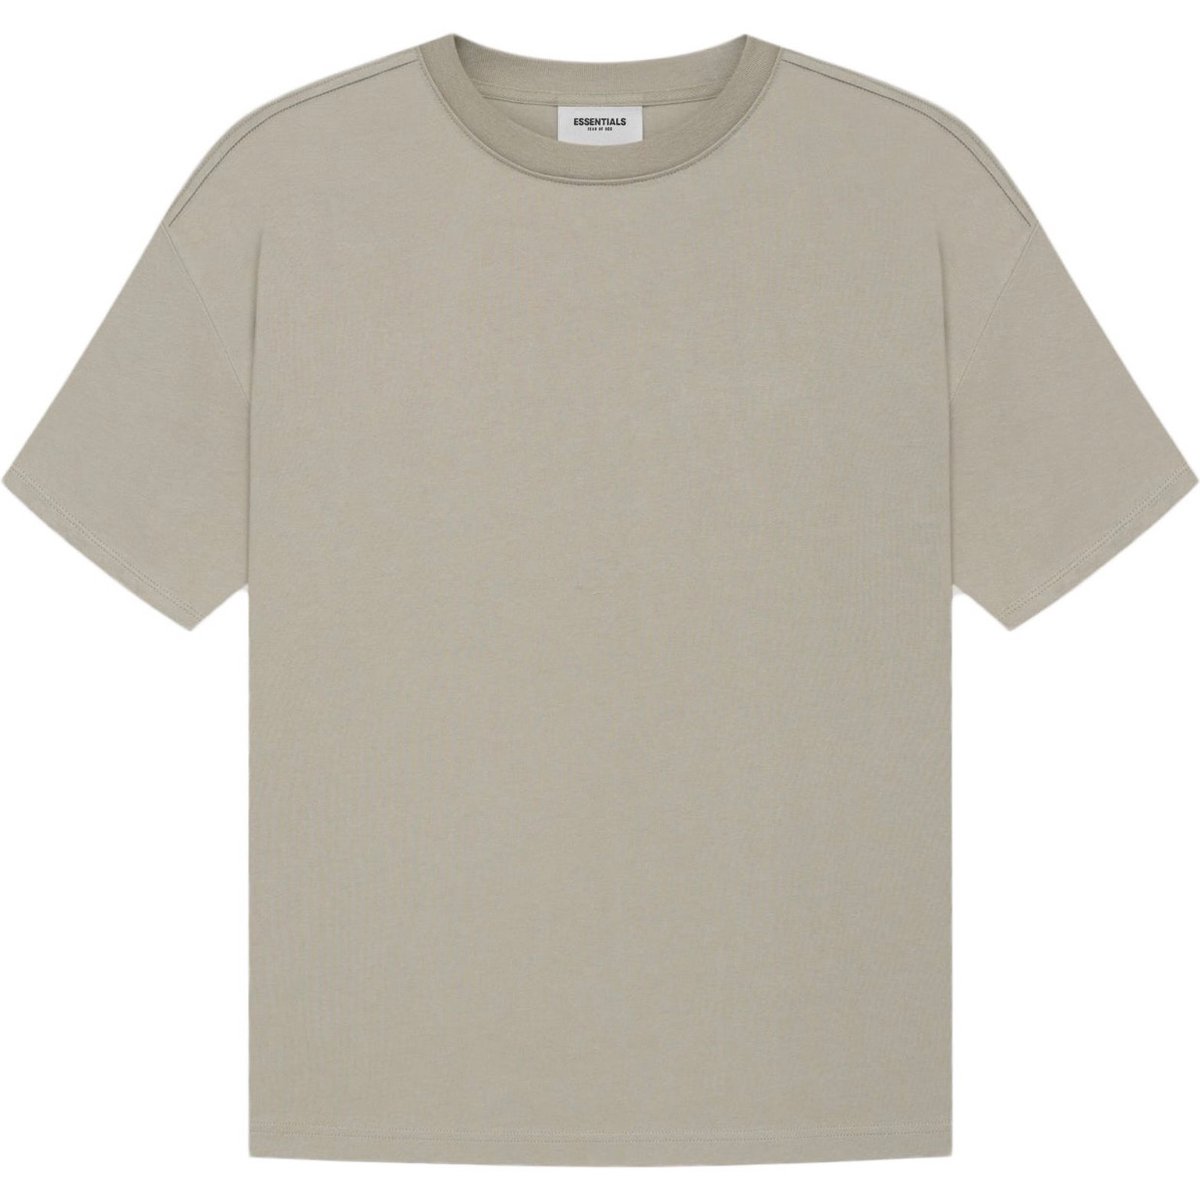 Taupe Cotton Sweatshirt by Fear of God ESSENTIALS on Sale